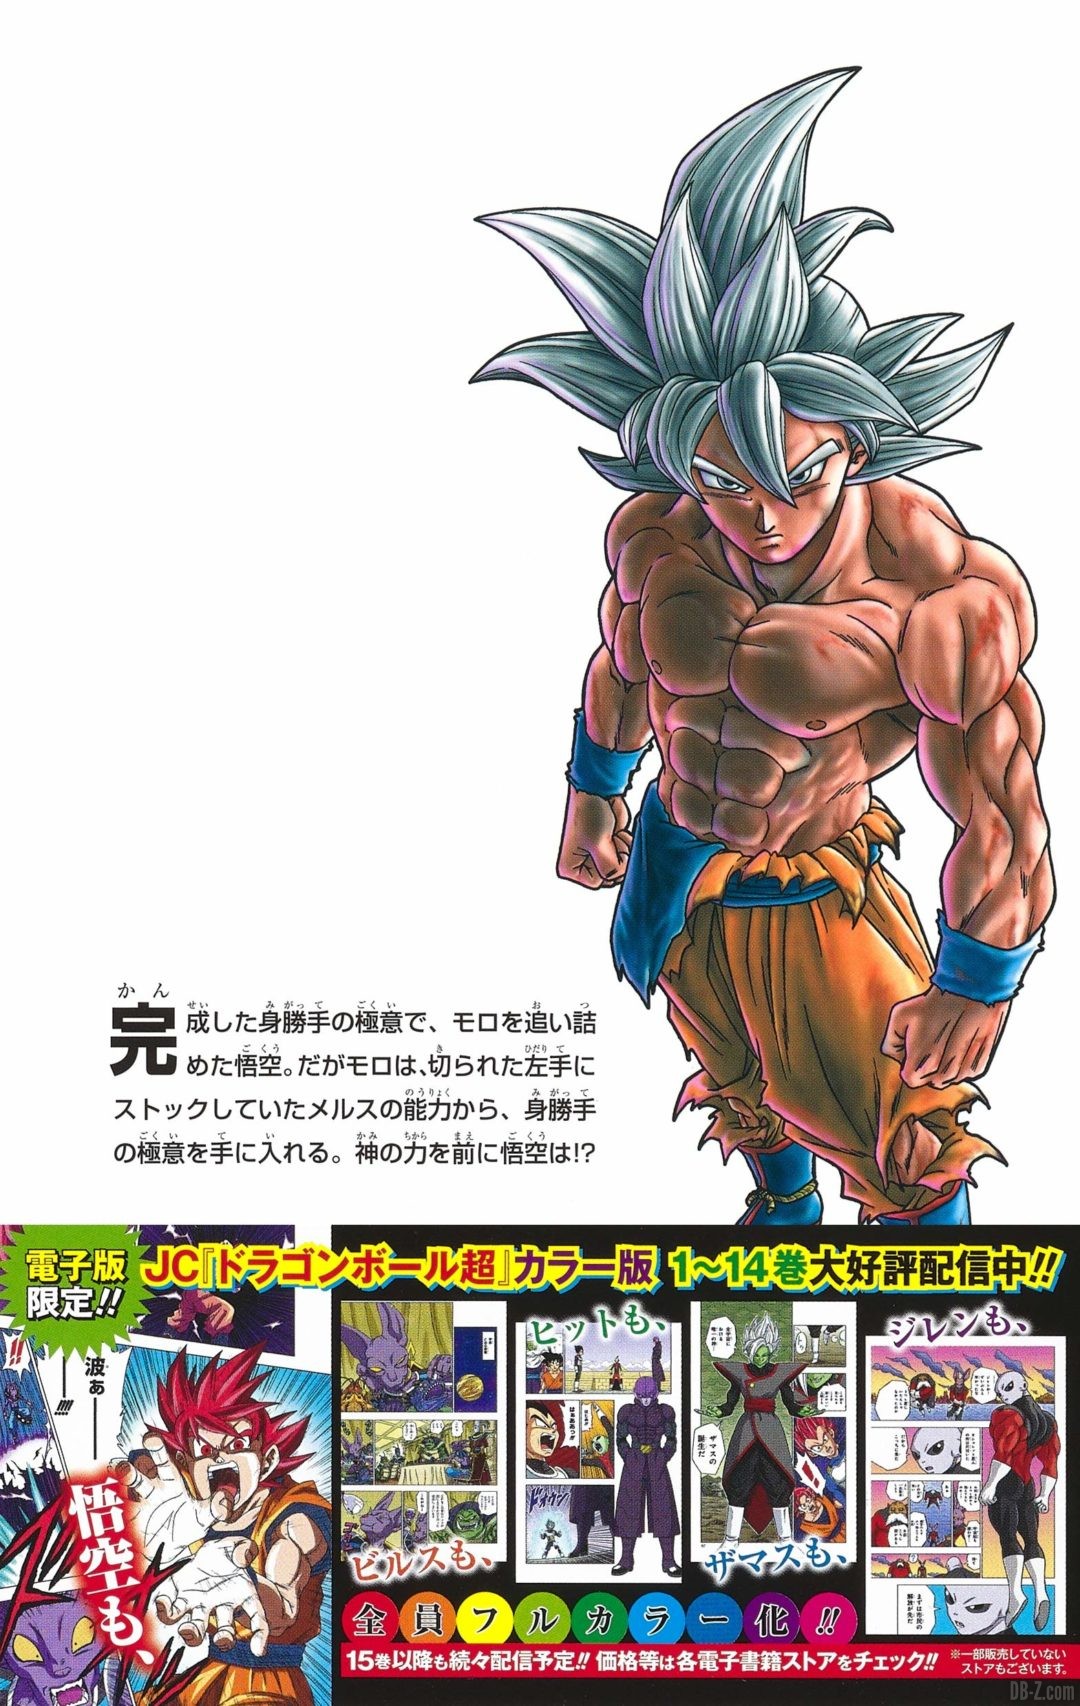 DBS-tome-15-flyer-promotionnel-arriere